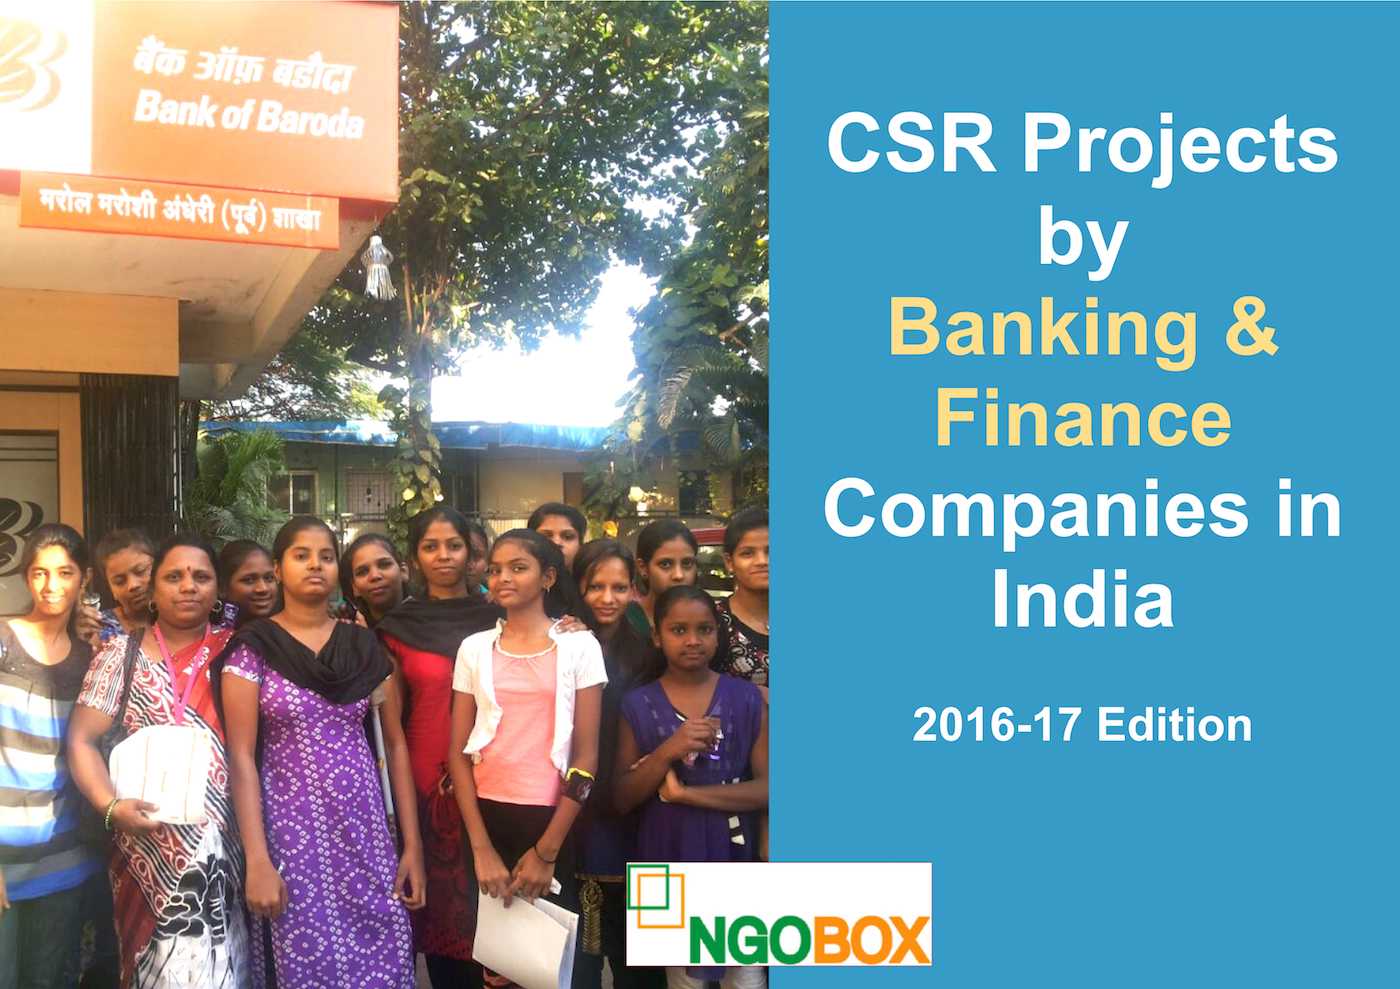 CSR Projects by Banking and Finance Companies in India